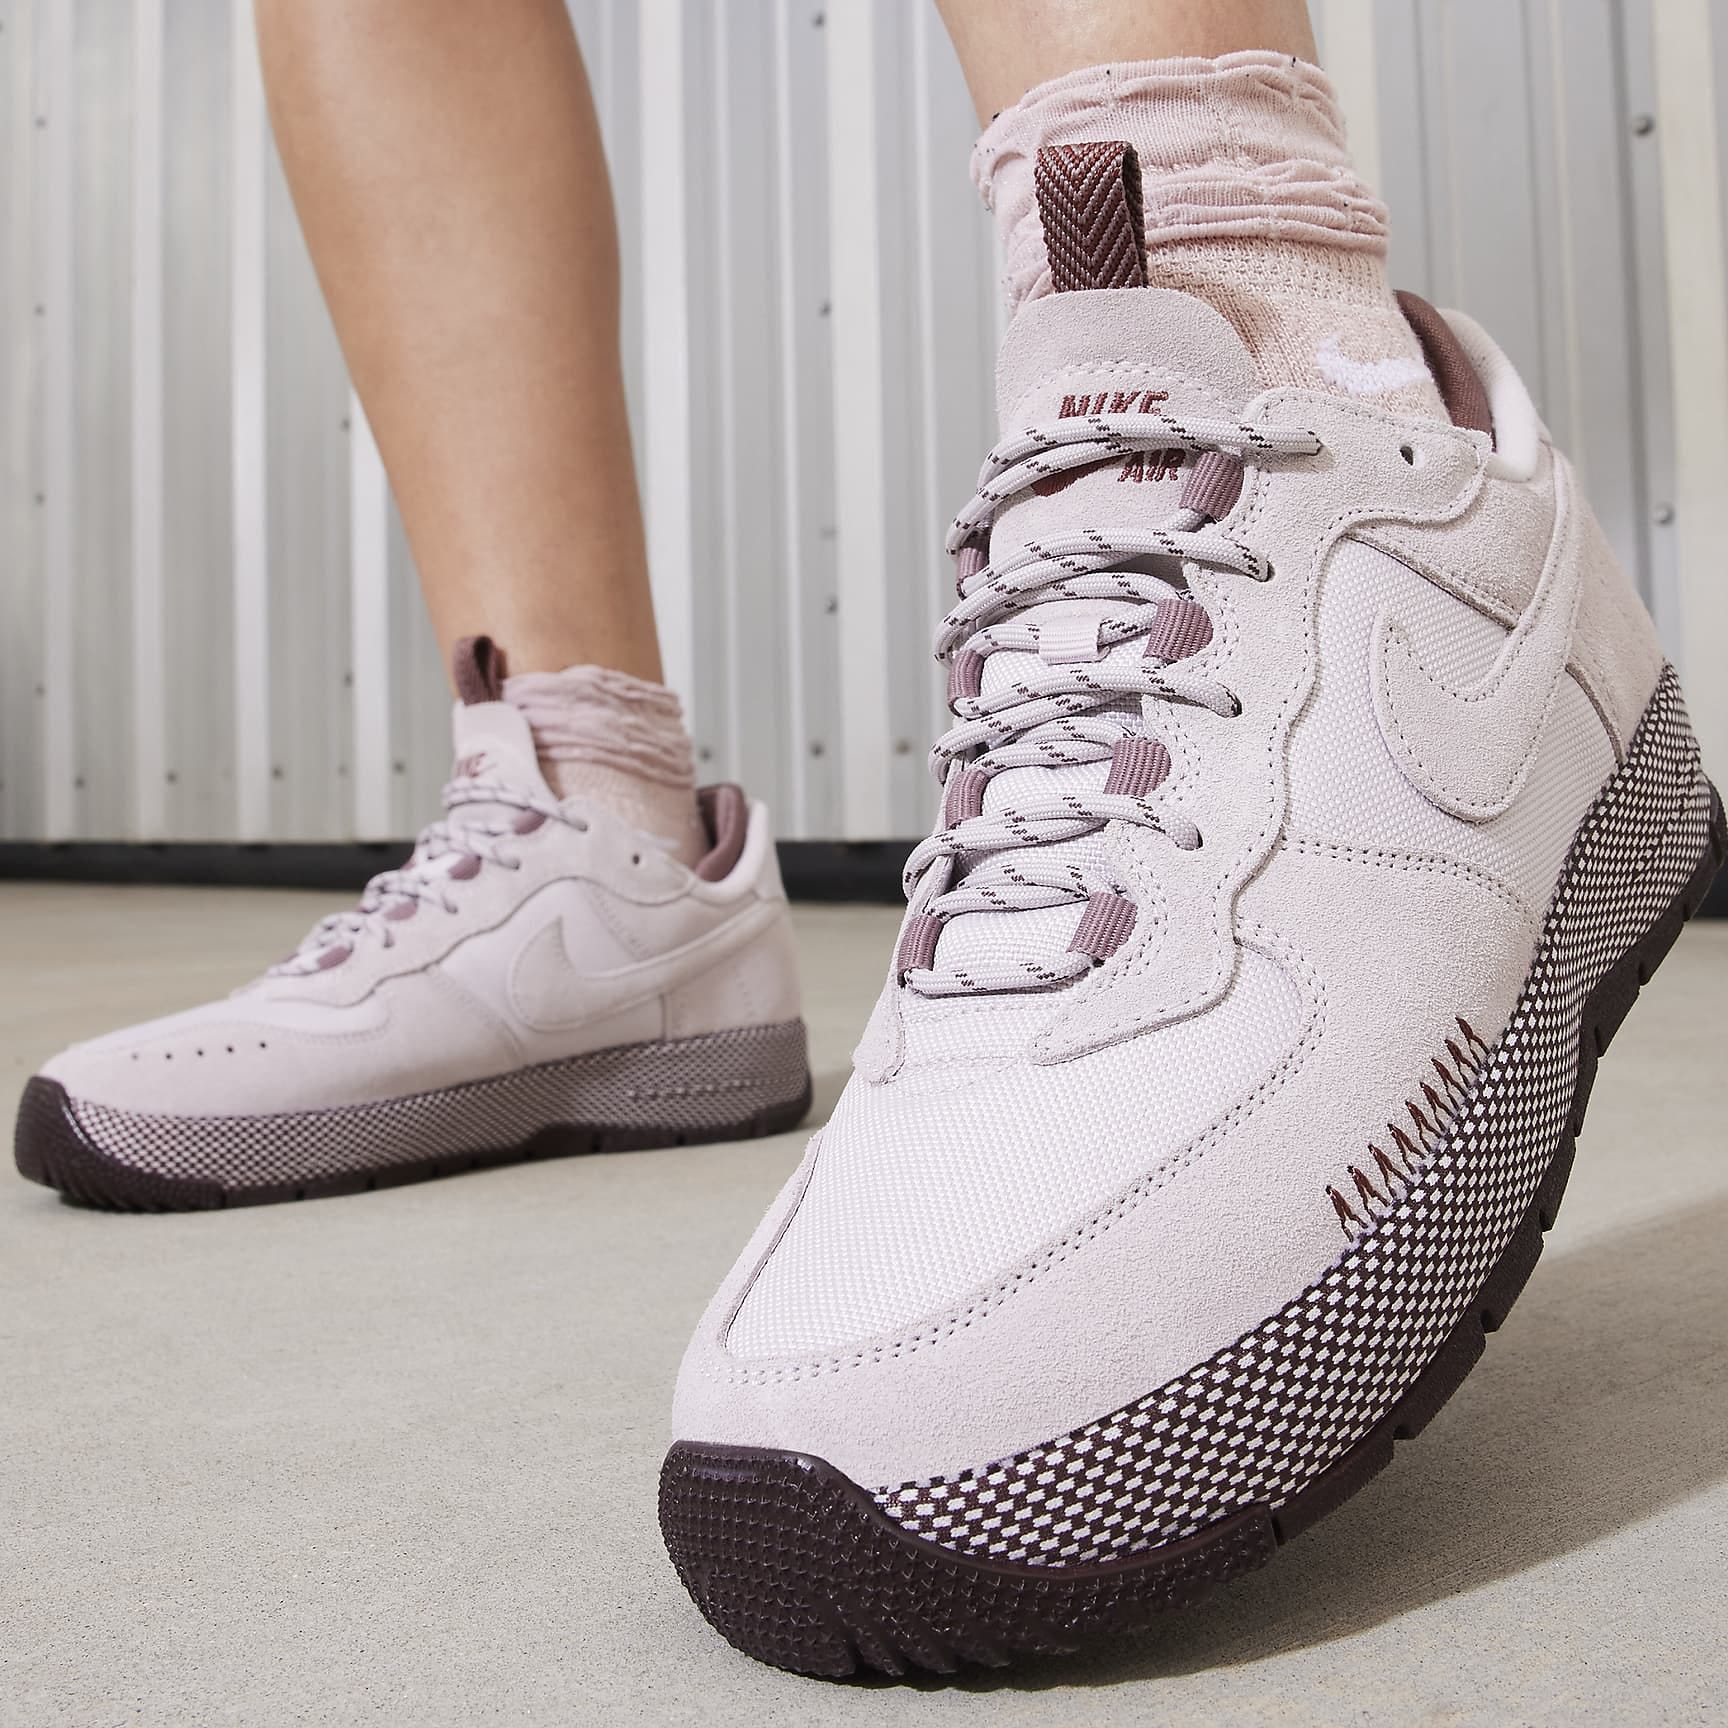 A pair of pale pink sneakers with dark brown soles and accents.